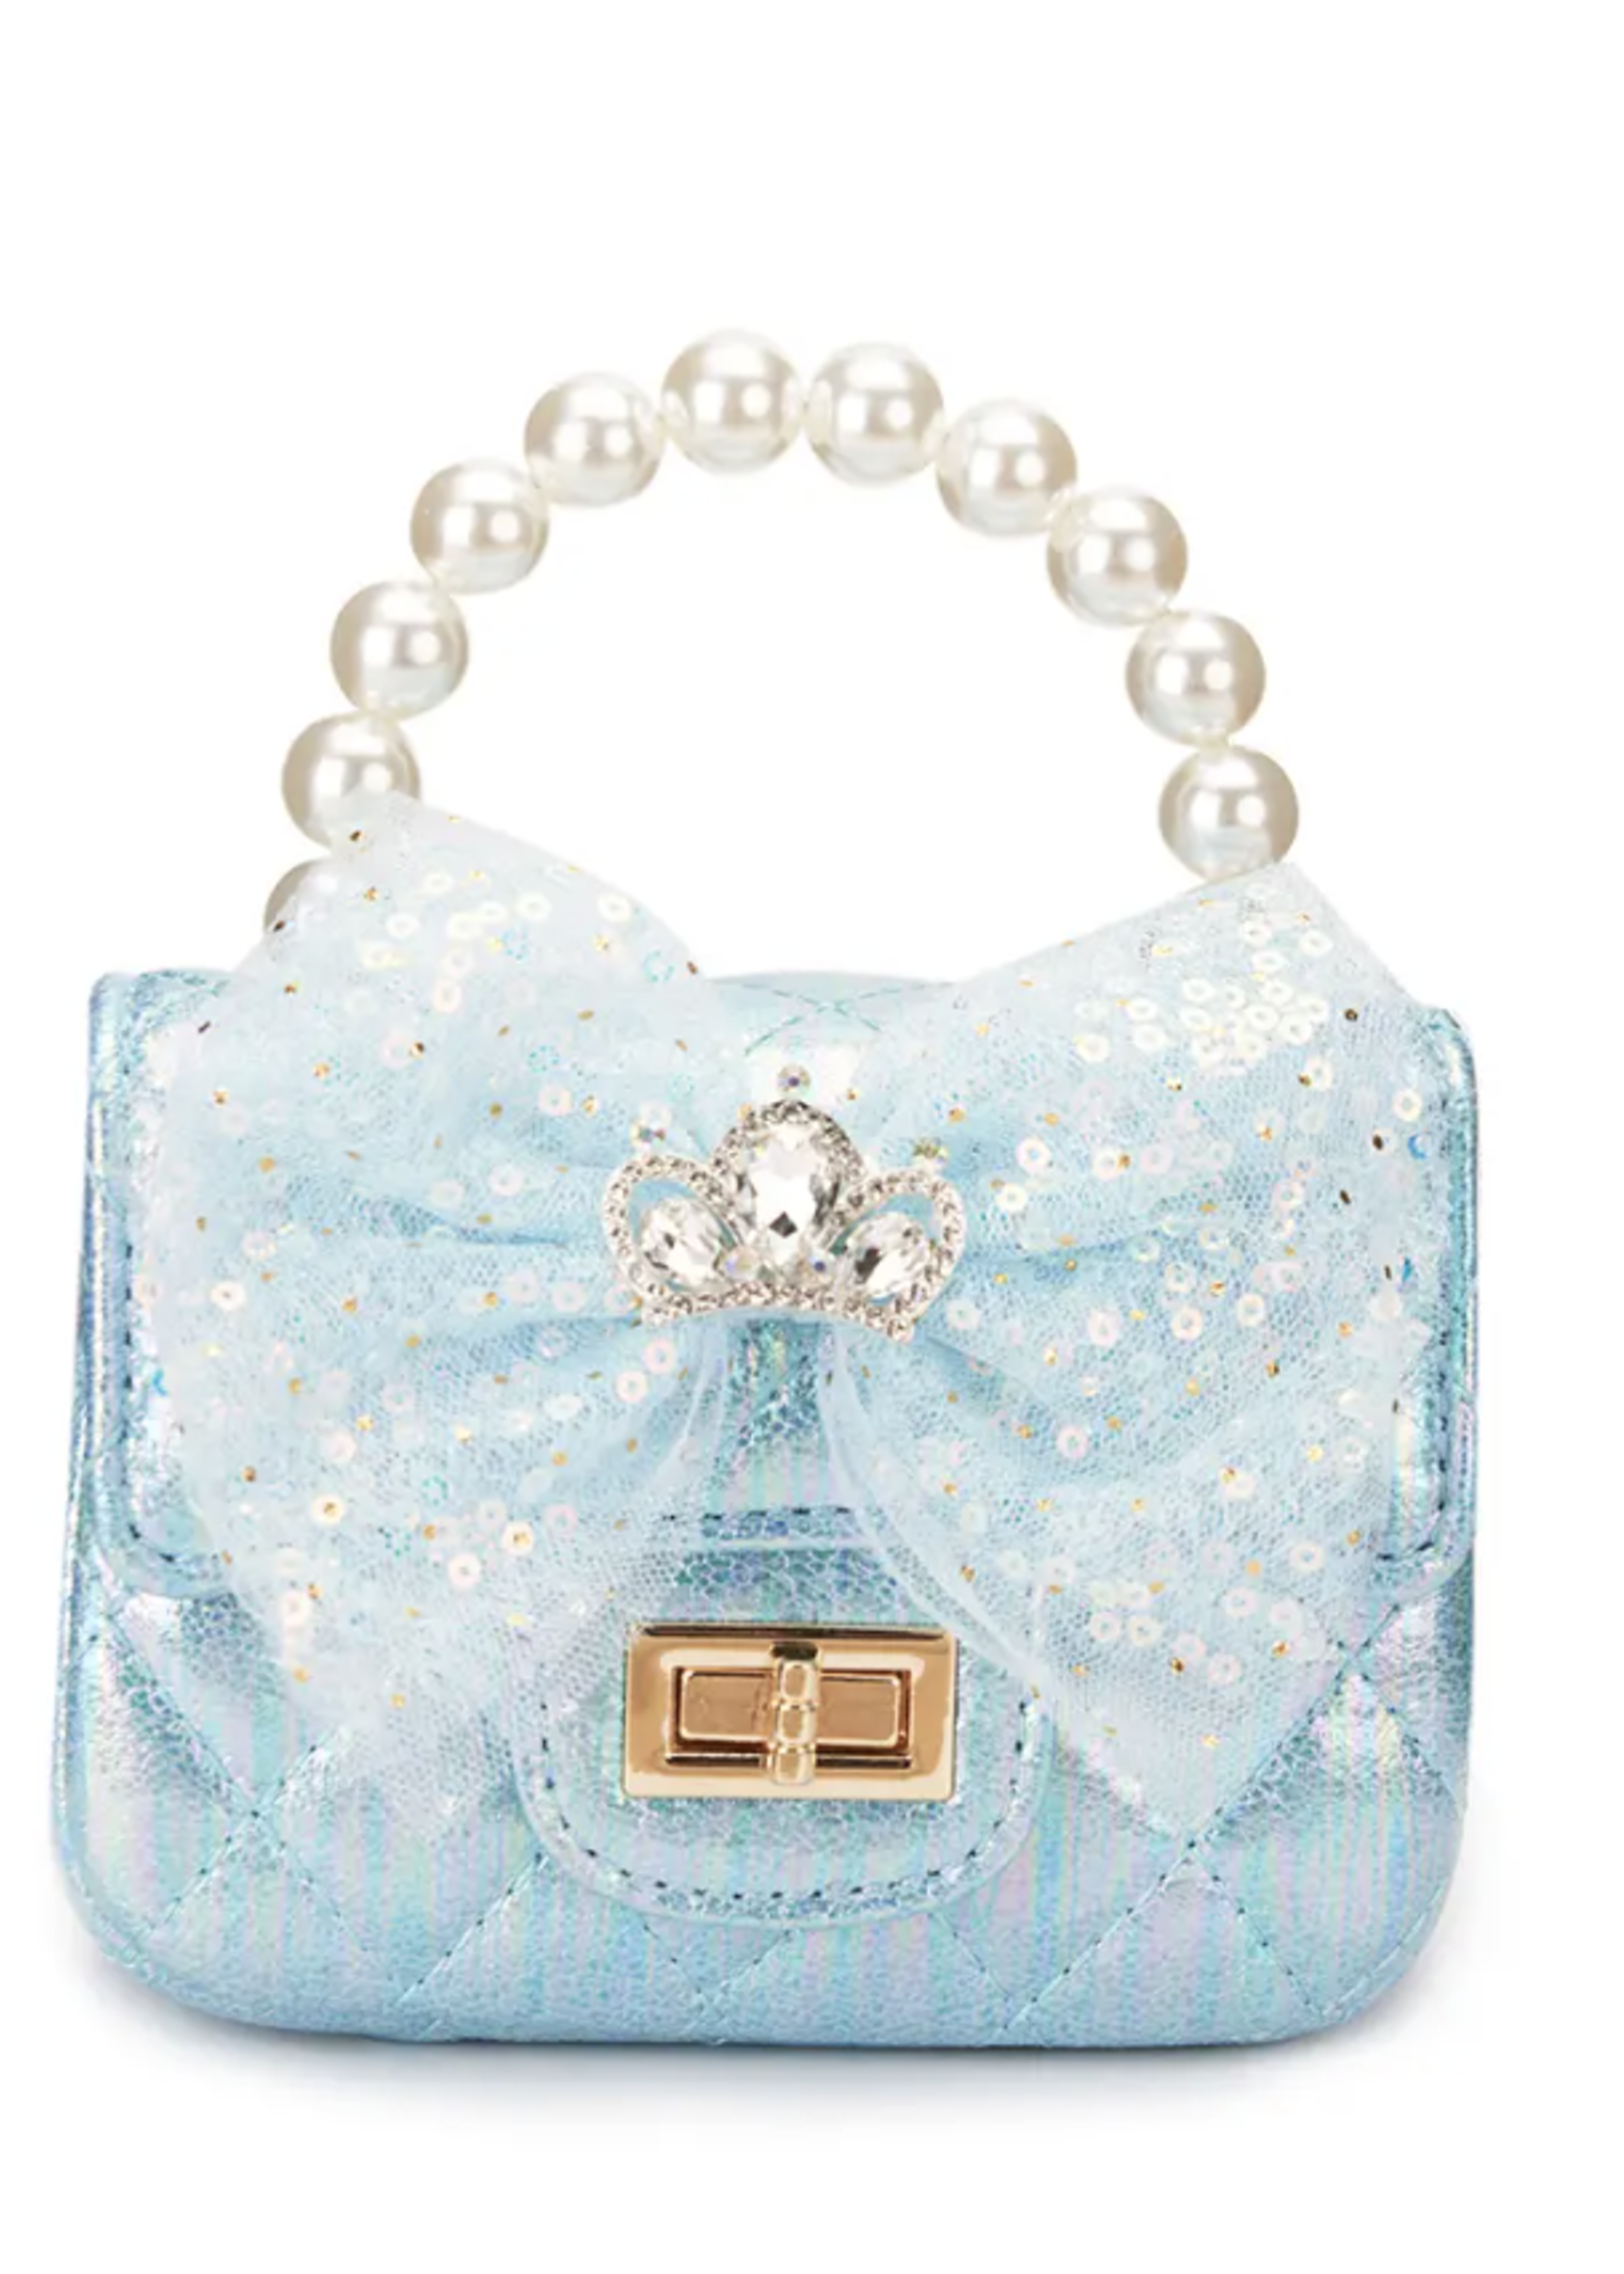 Doe a dear Blue Mesh Bow Shiny Quilted Purse